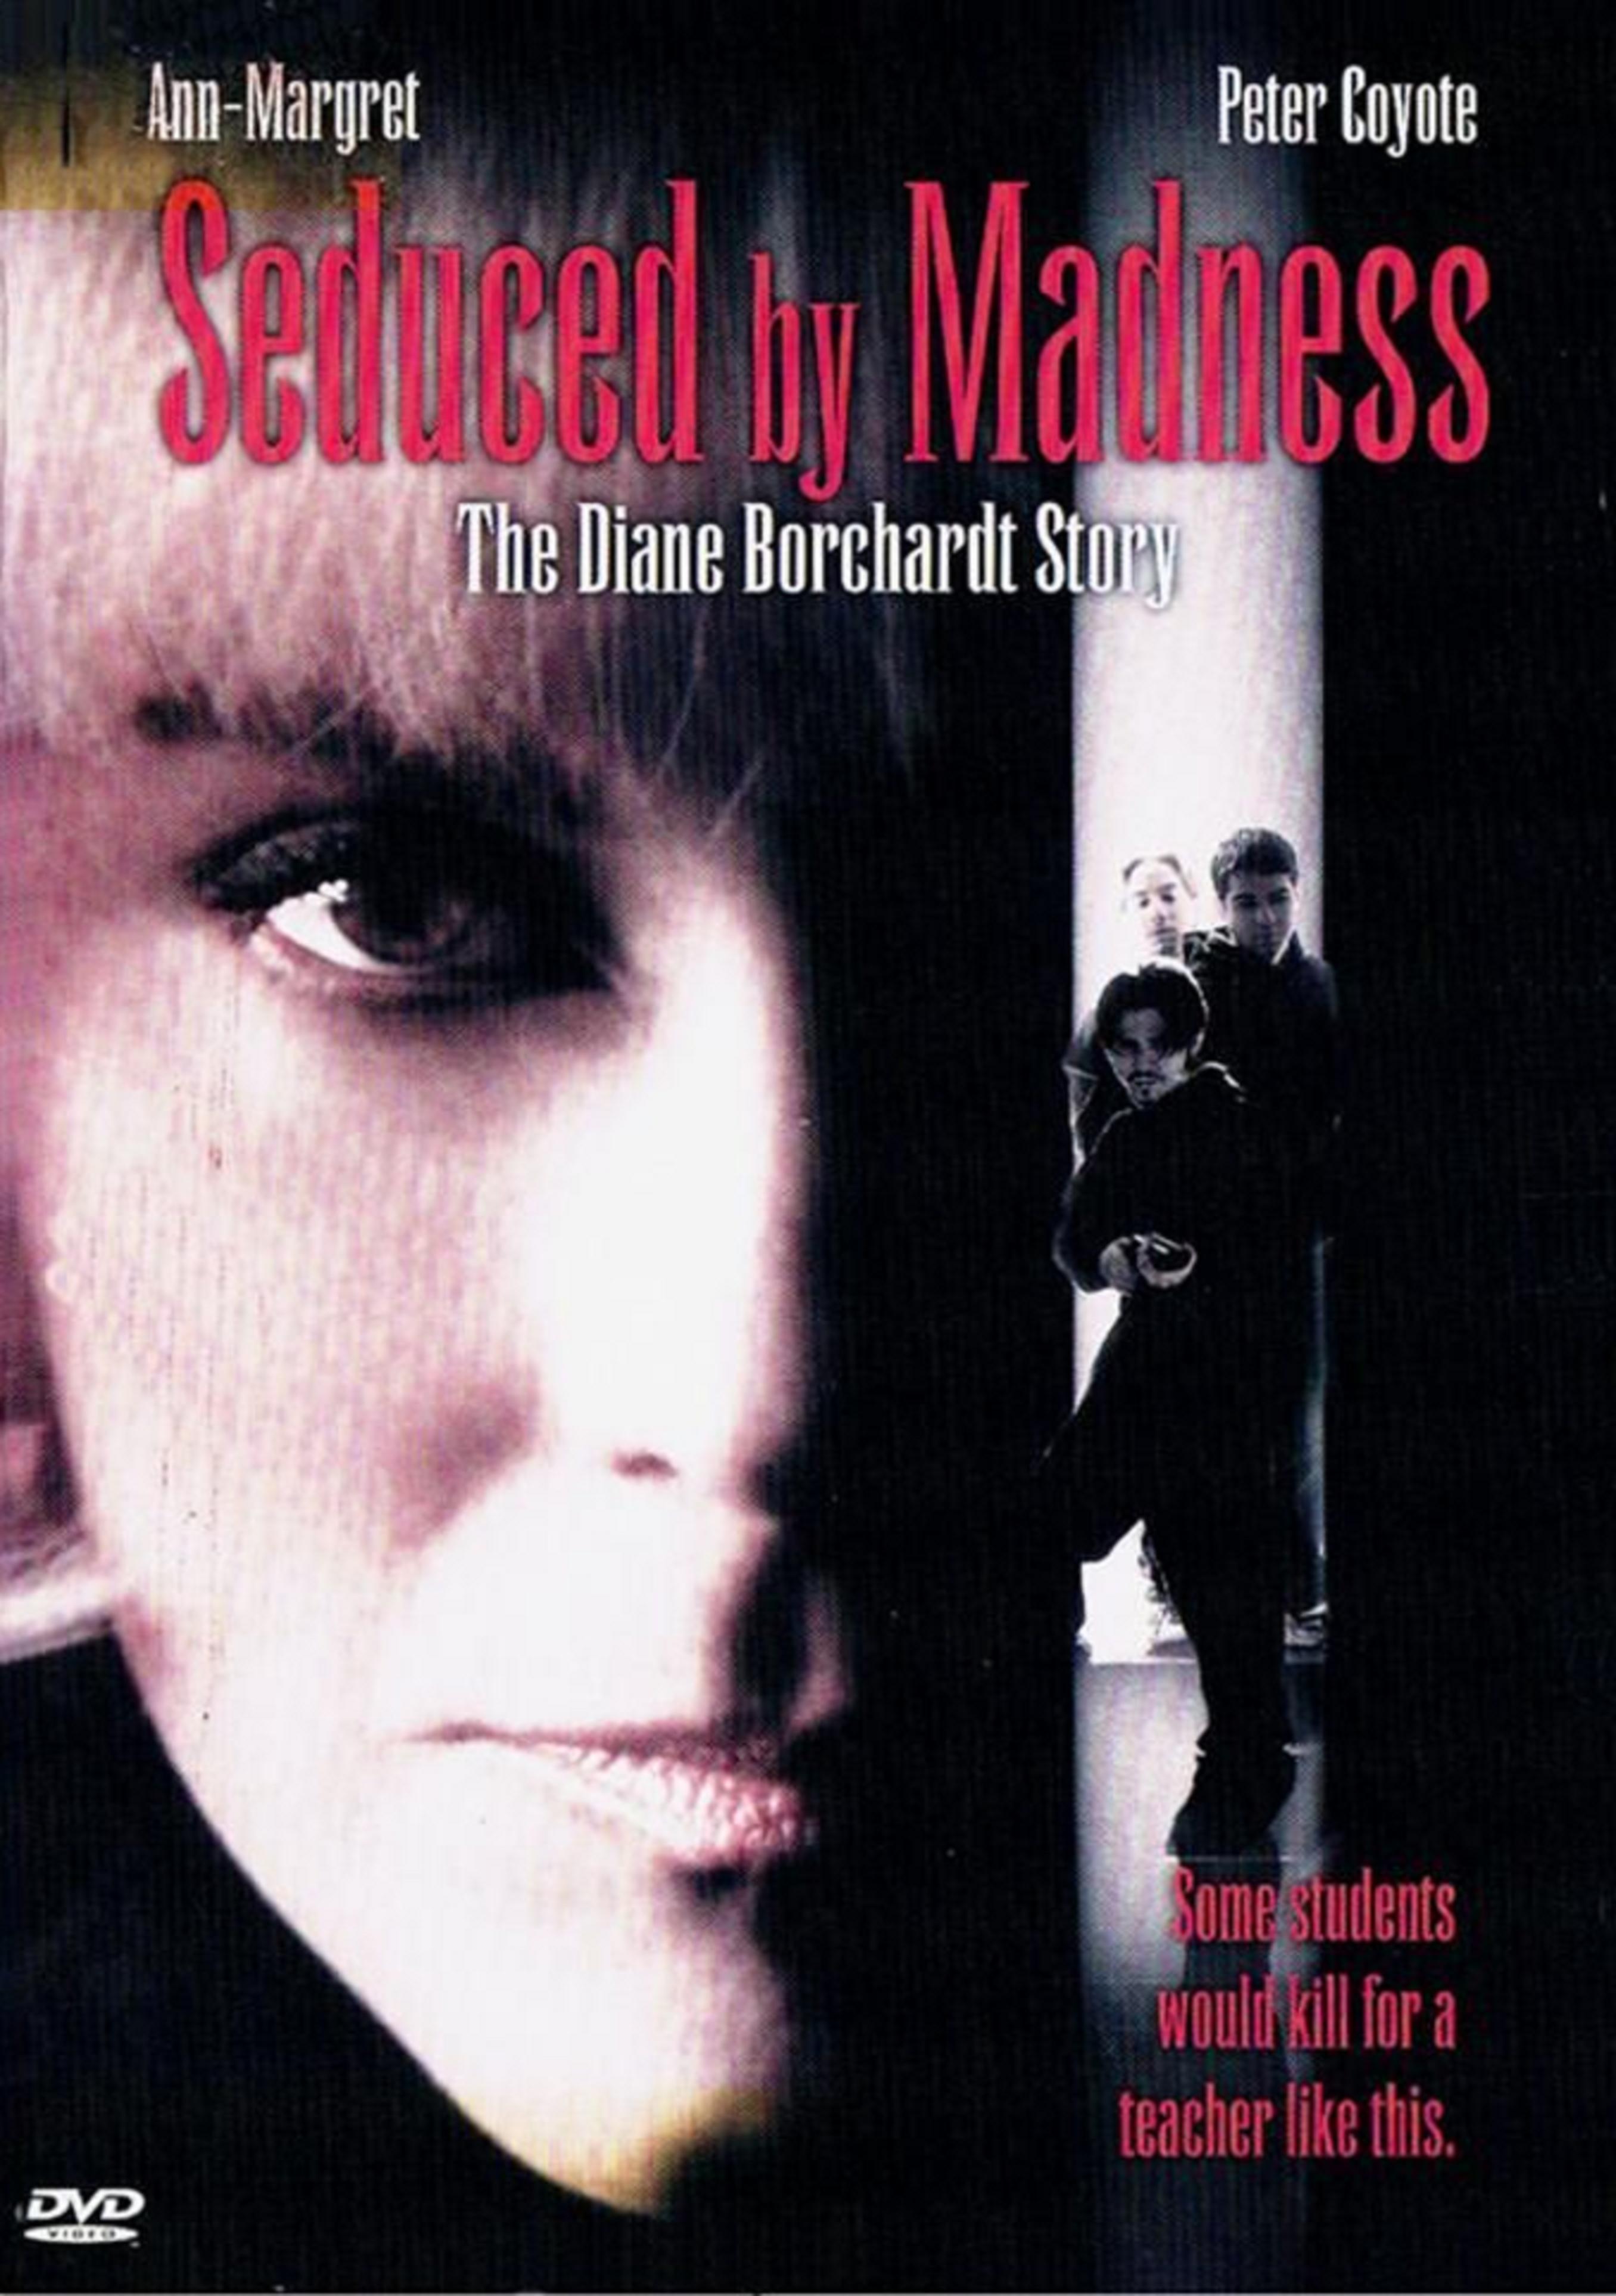 Seduced by Madness: The Diane Borchardt Story (1996) Screenshot 2